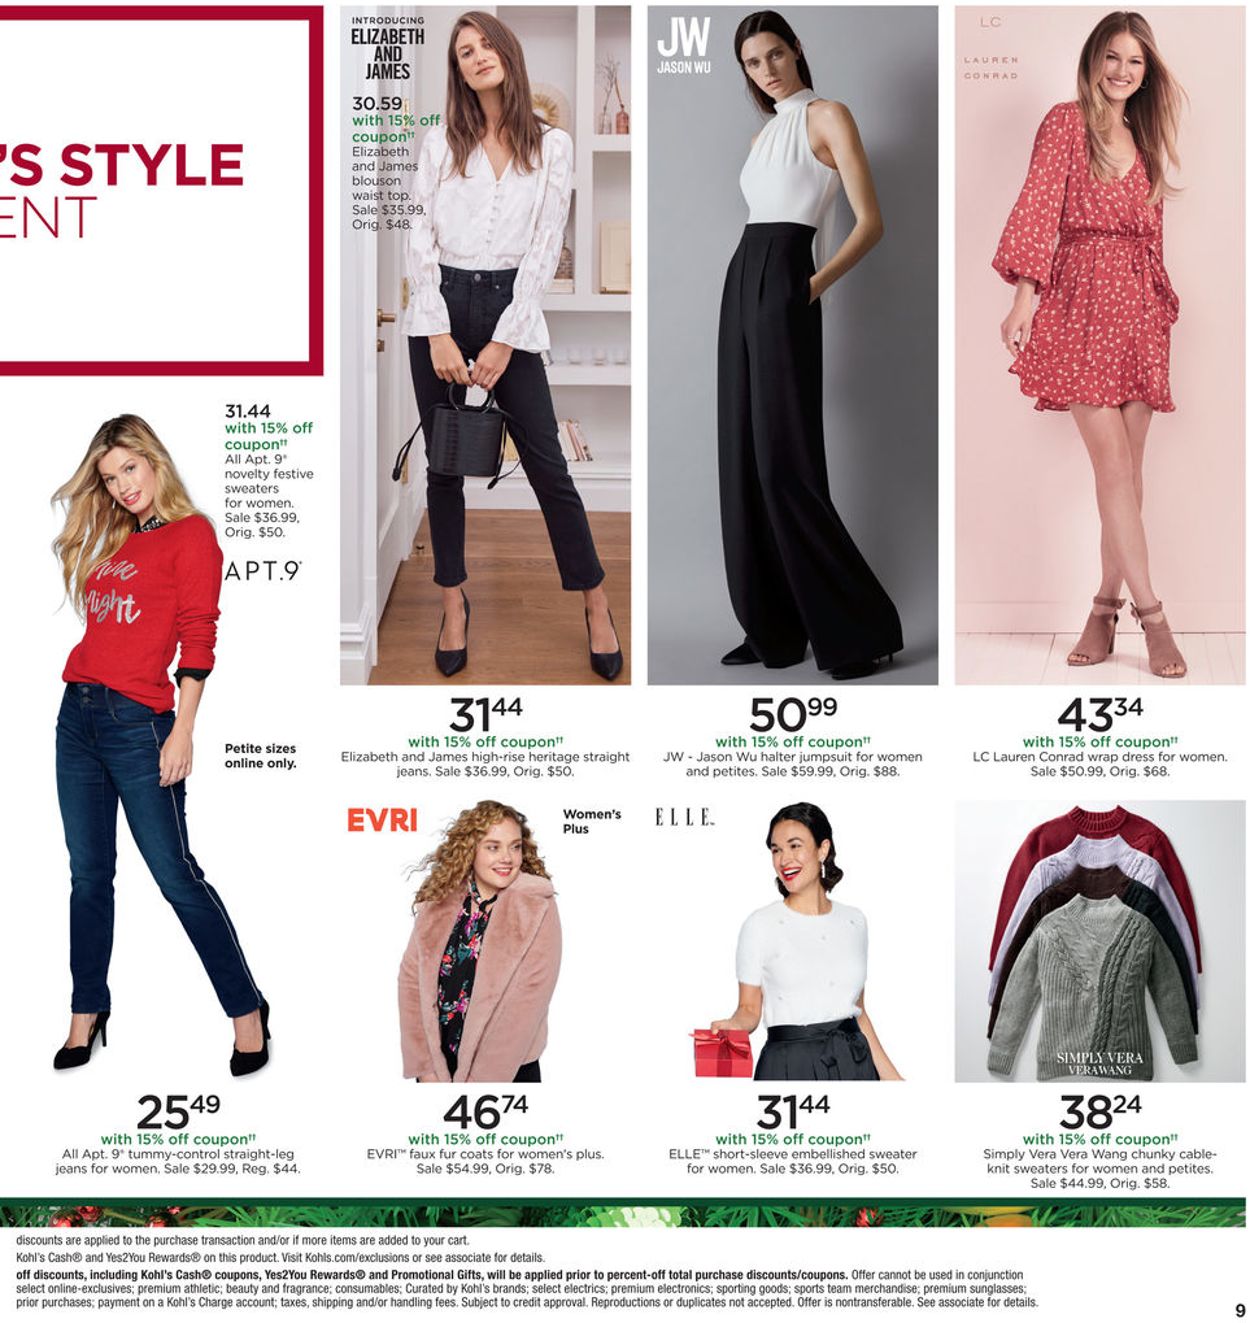 Kohl's Current weekly ad 11/07 - 11/17/2019 [9] - frequent-ads.com